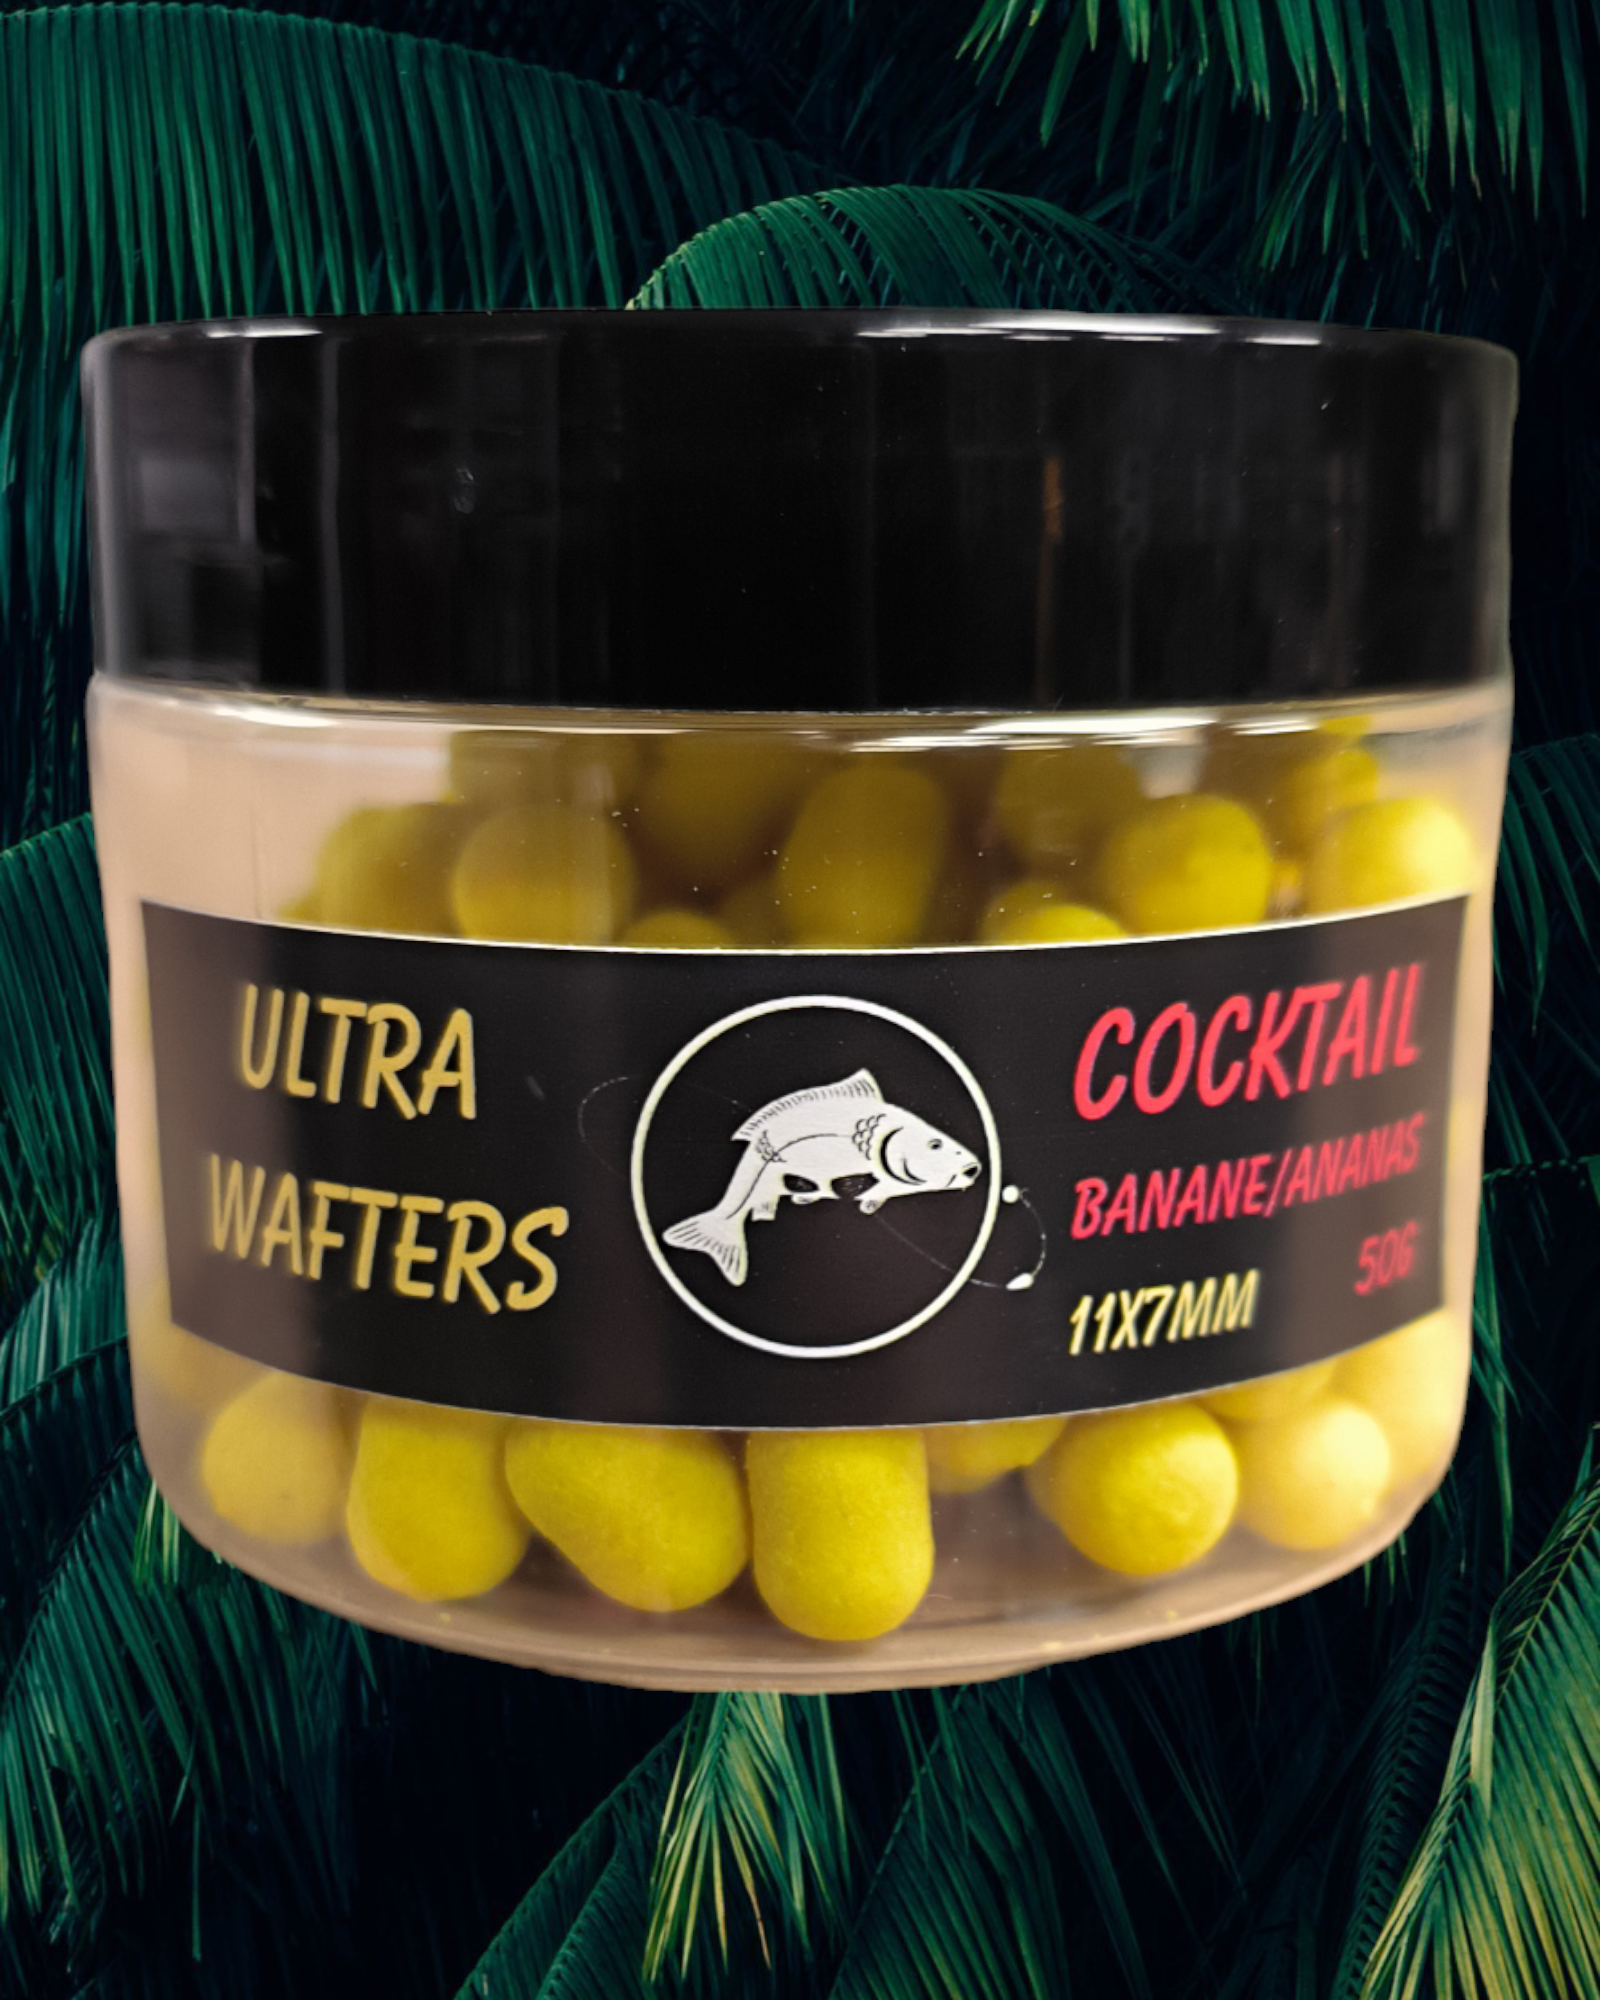 WAFTERS 11x7mm COCKTAIL 50g Ultra-peche Banane/Ananas